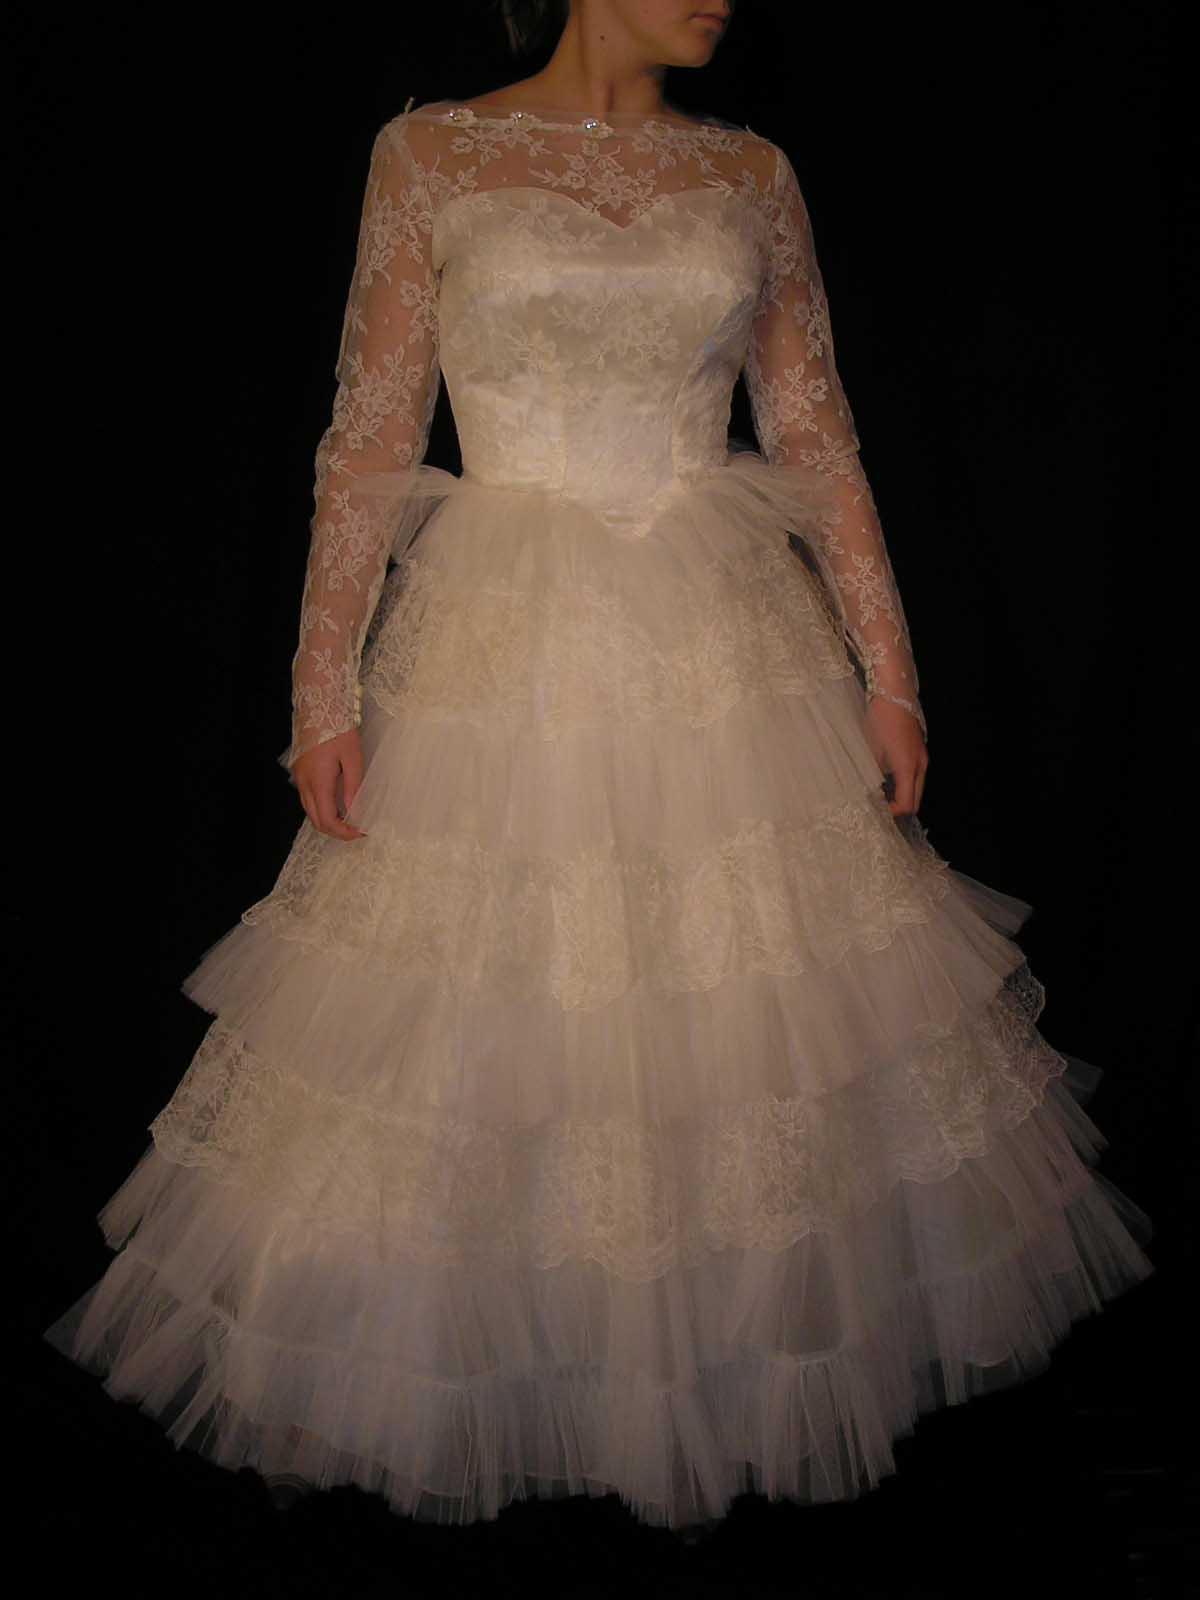 lace mermaid wedding dresses IVORY LACE TULLE VTG 50s WEDDING DRESS PROM GOWN S